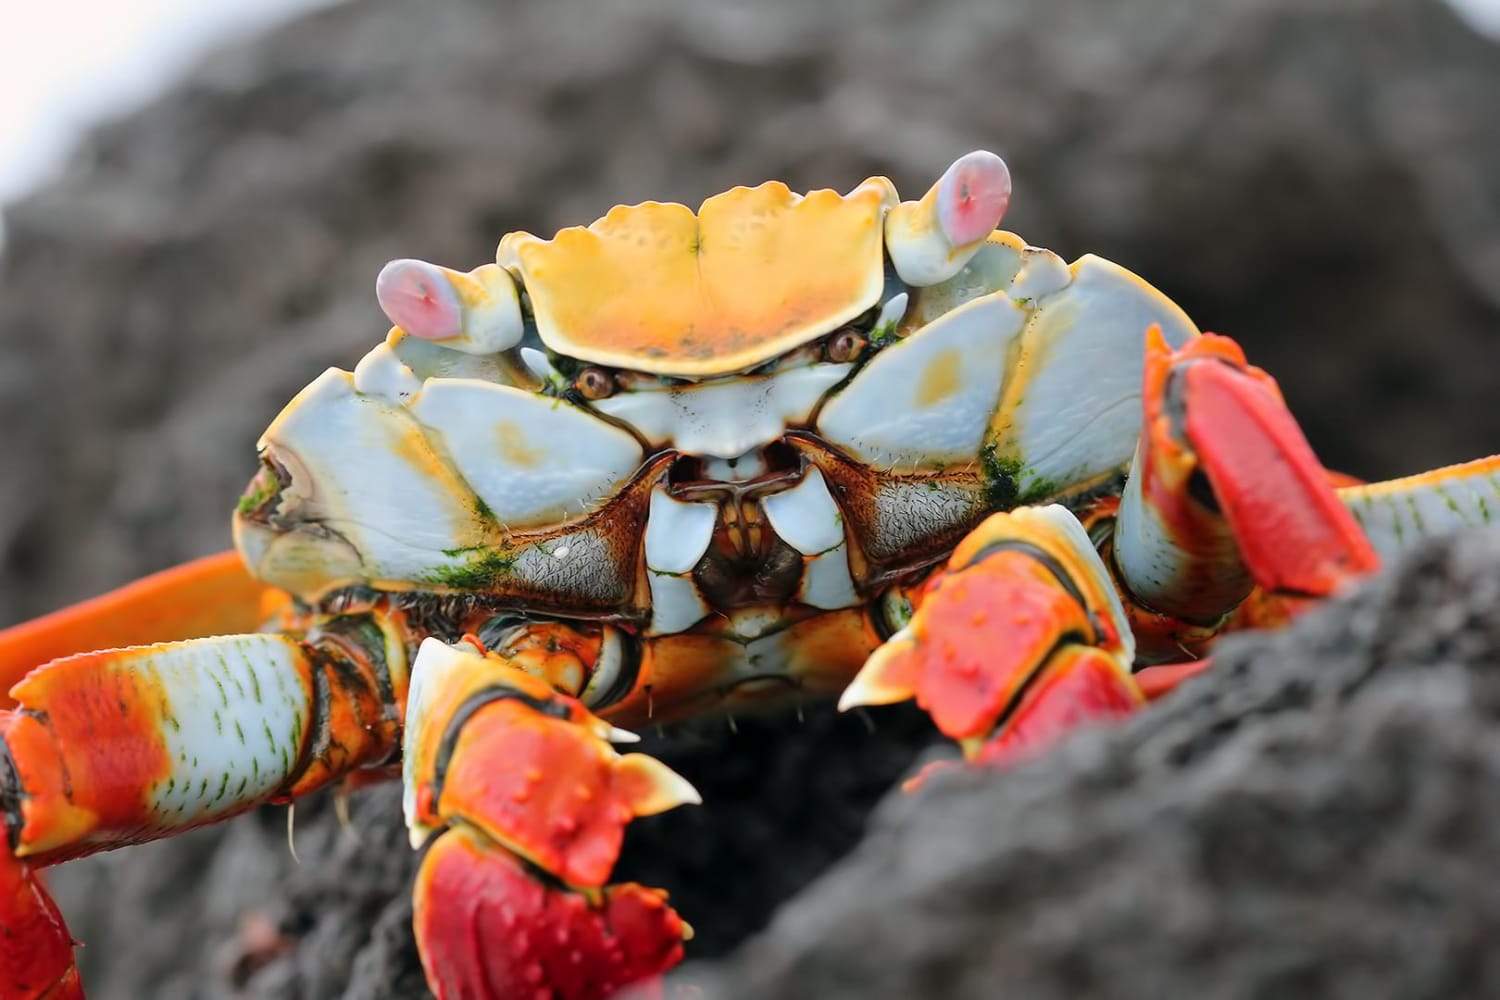 This red rock crab from the Galapagos islands looks like it has a face inside its face. I personally thought it looked like a Decepticon